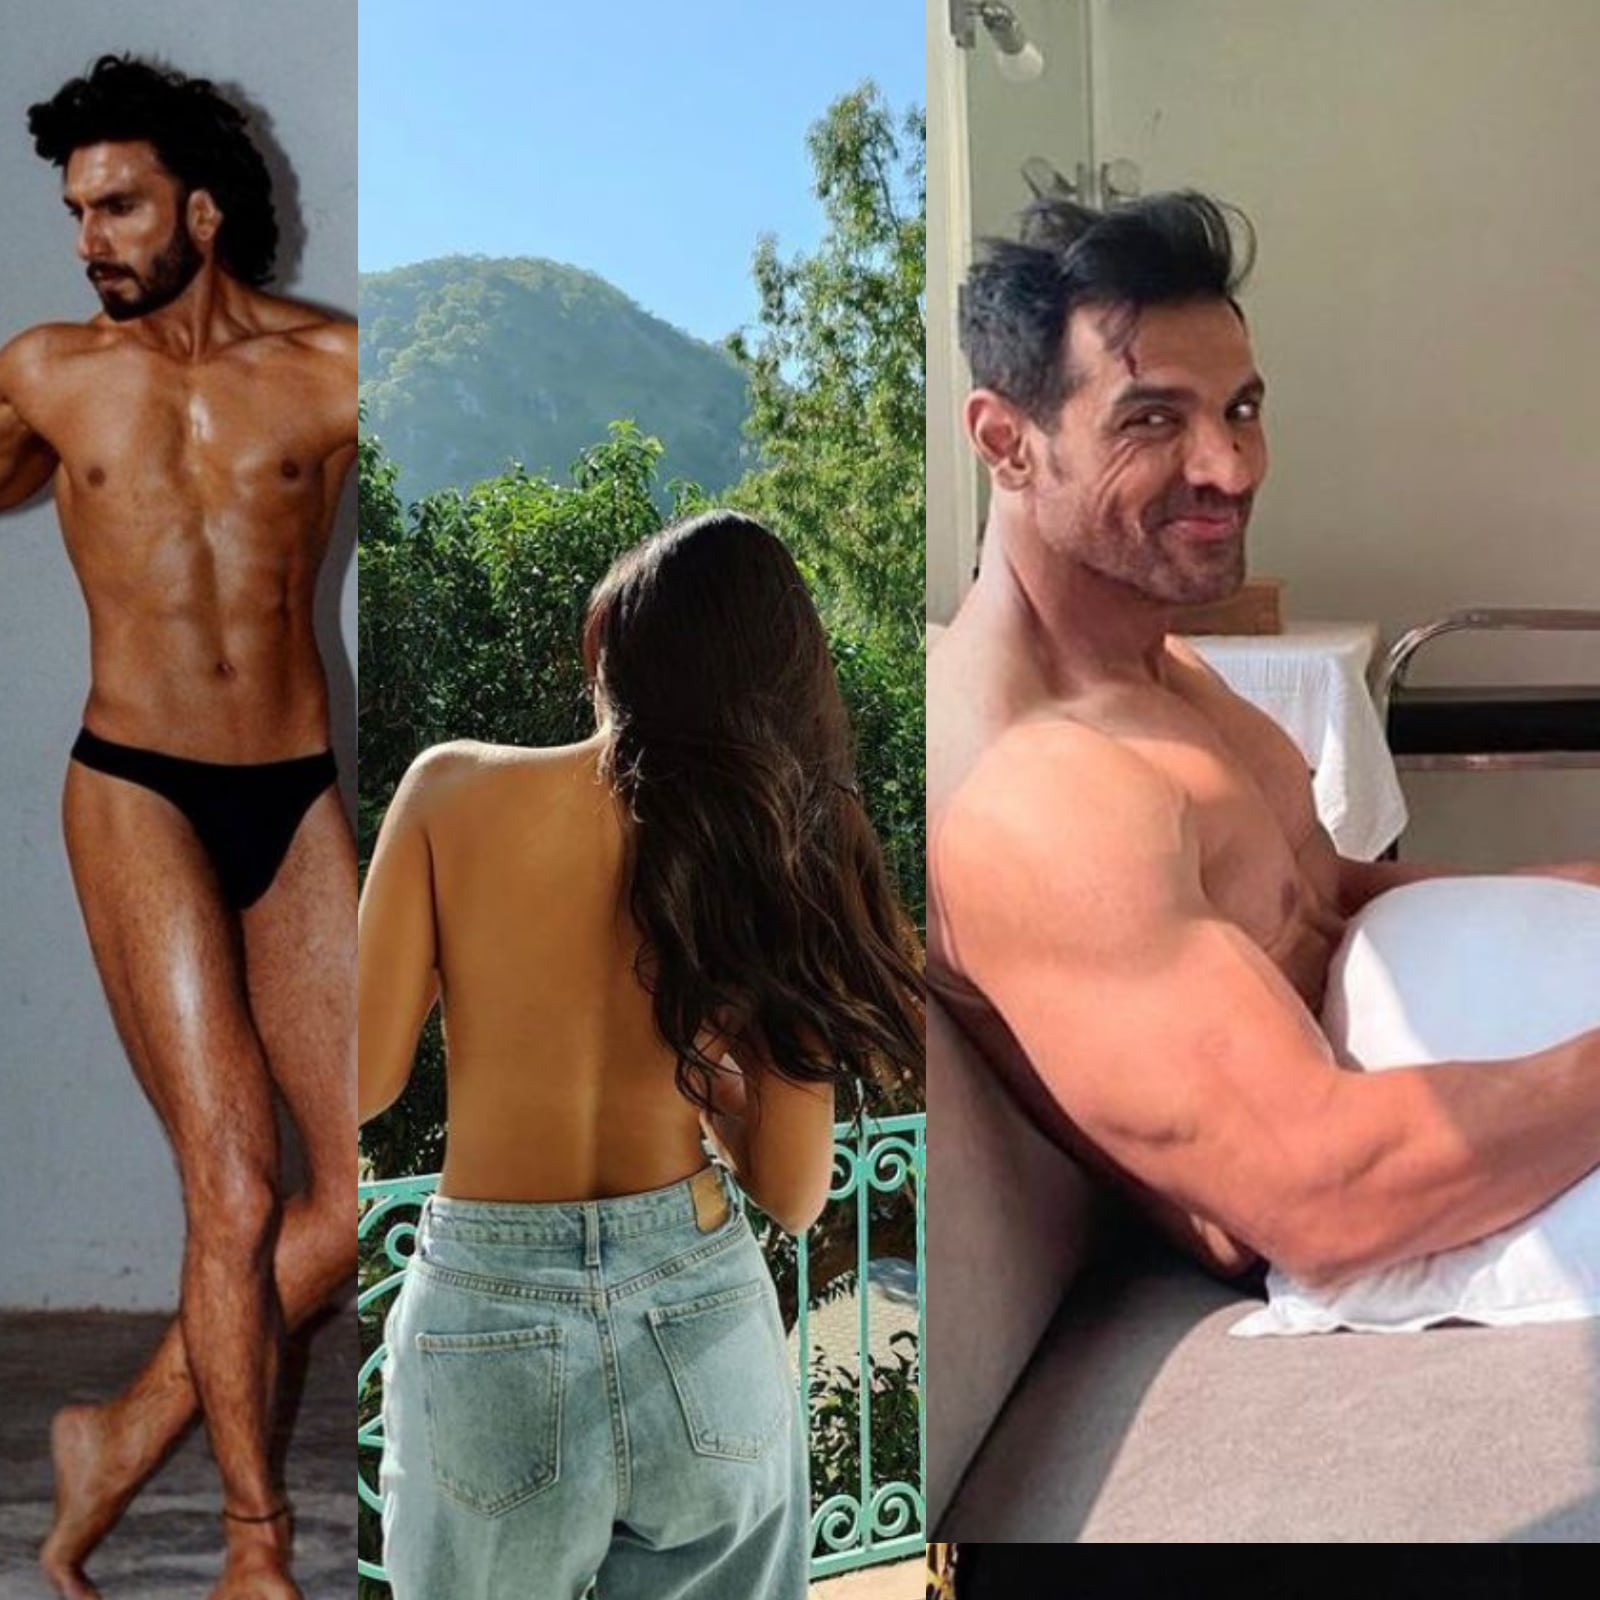 West Indian Nude Models - Naked Photoshoot: From Ranveer Singh To Milind Soman, Indian Celebrities  Went Naked